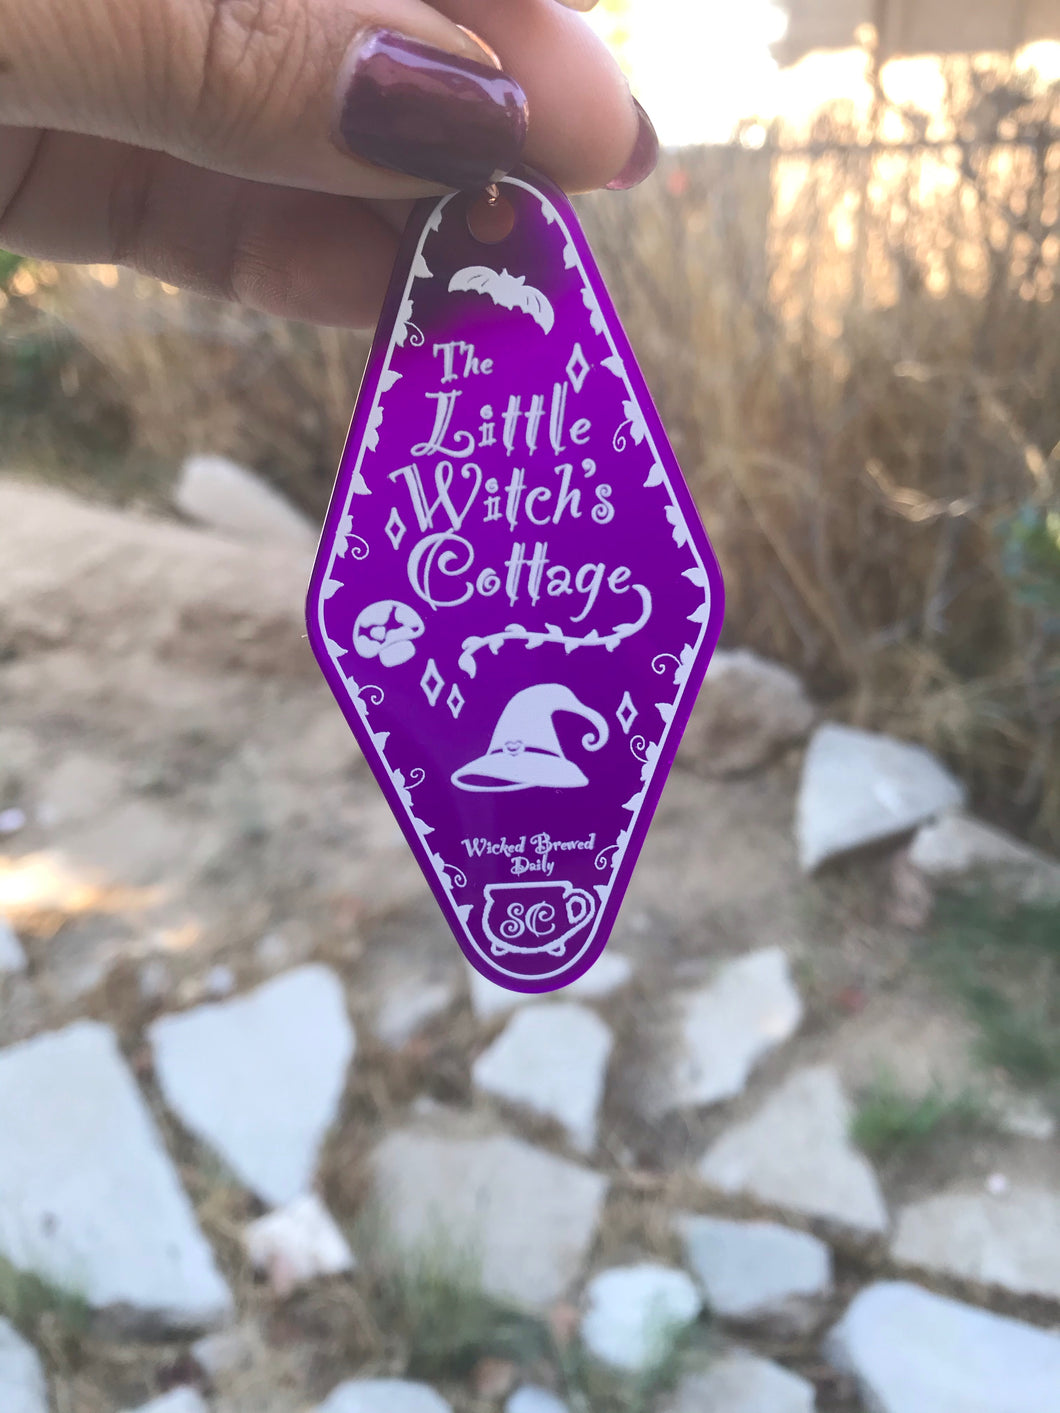 The Little Witch's Cottage Room Keychain